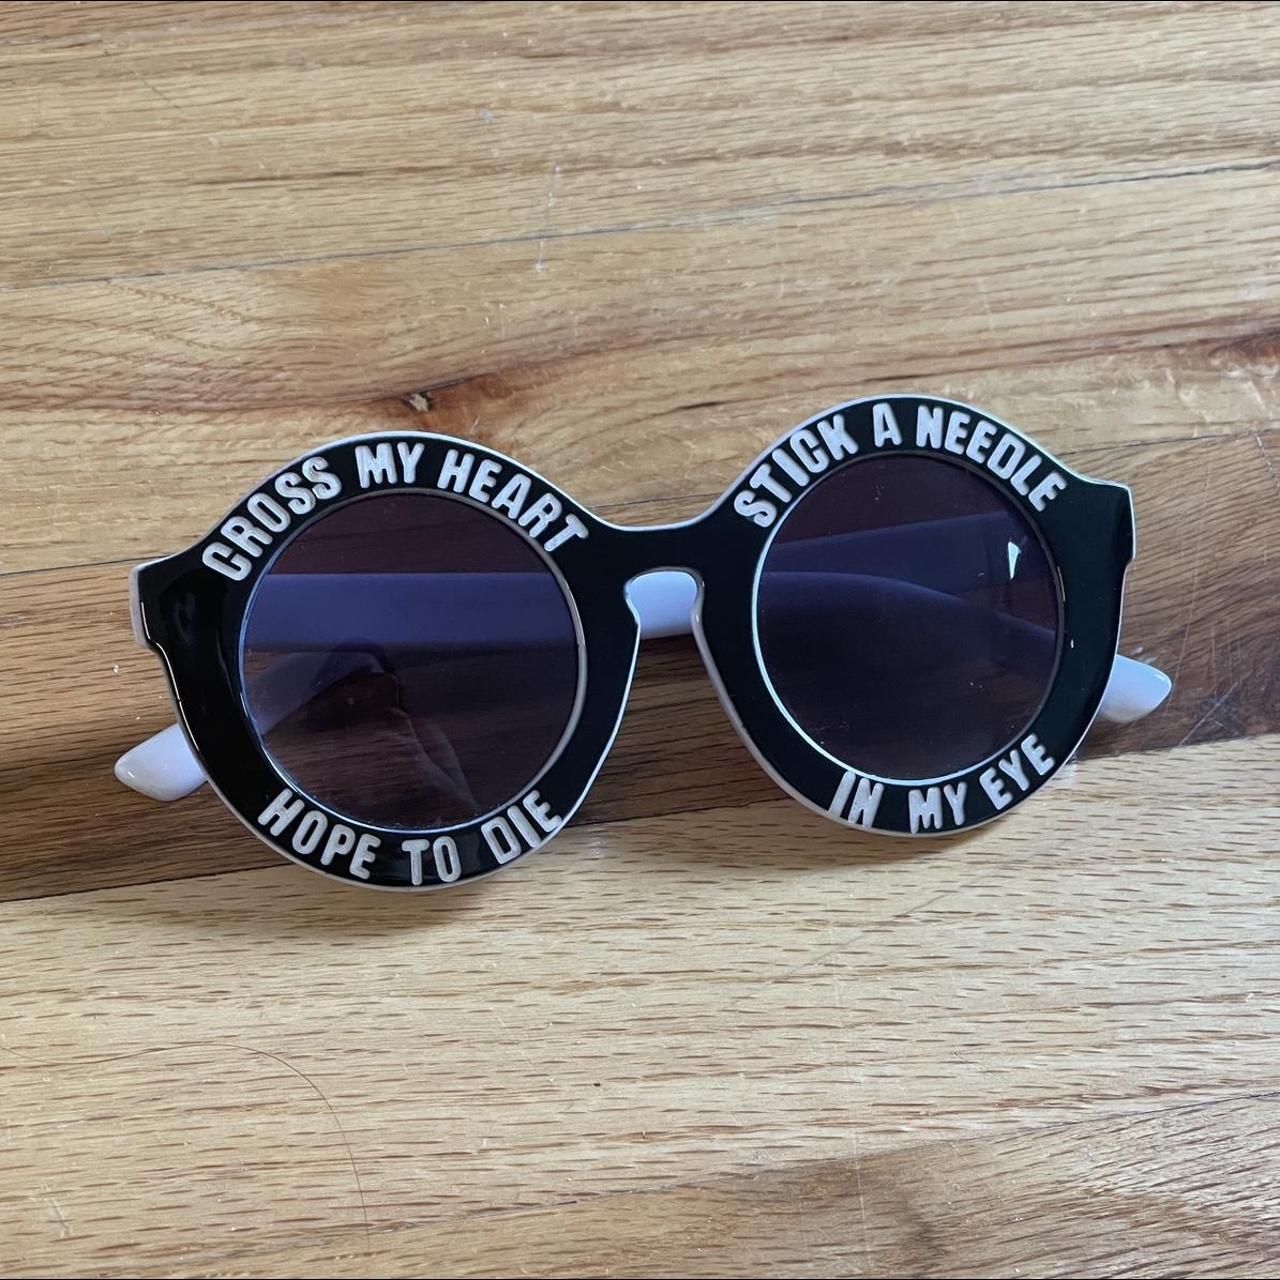 Urban Outfitters Women's Black and White Sunglasses